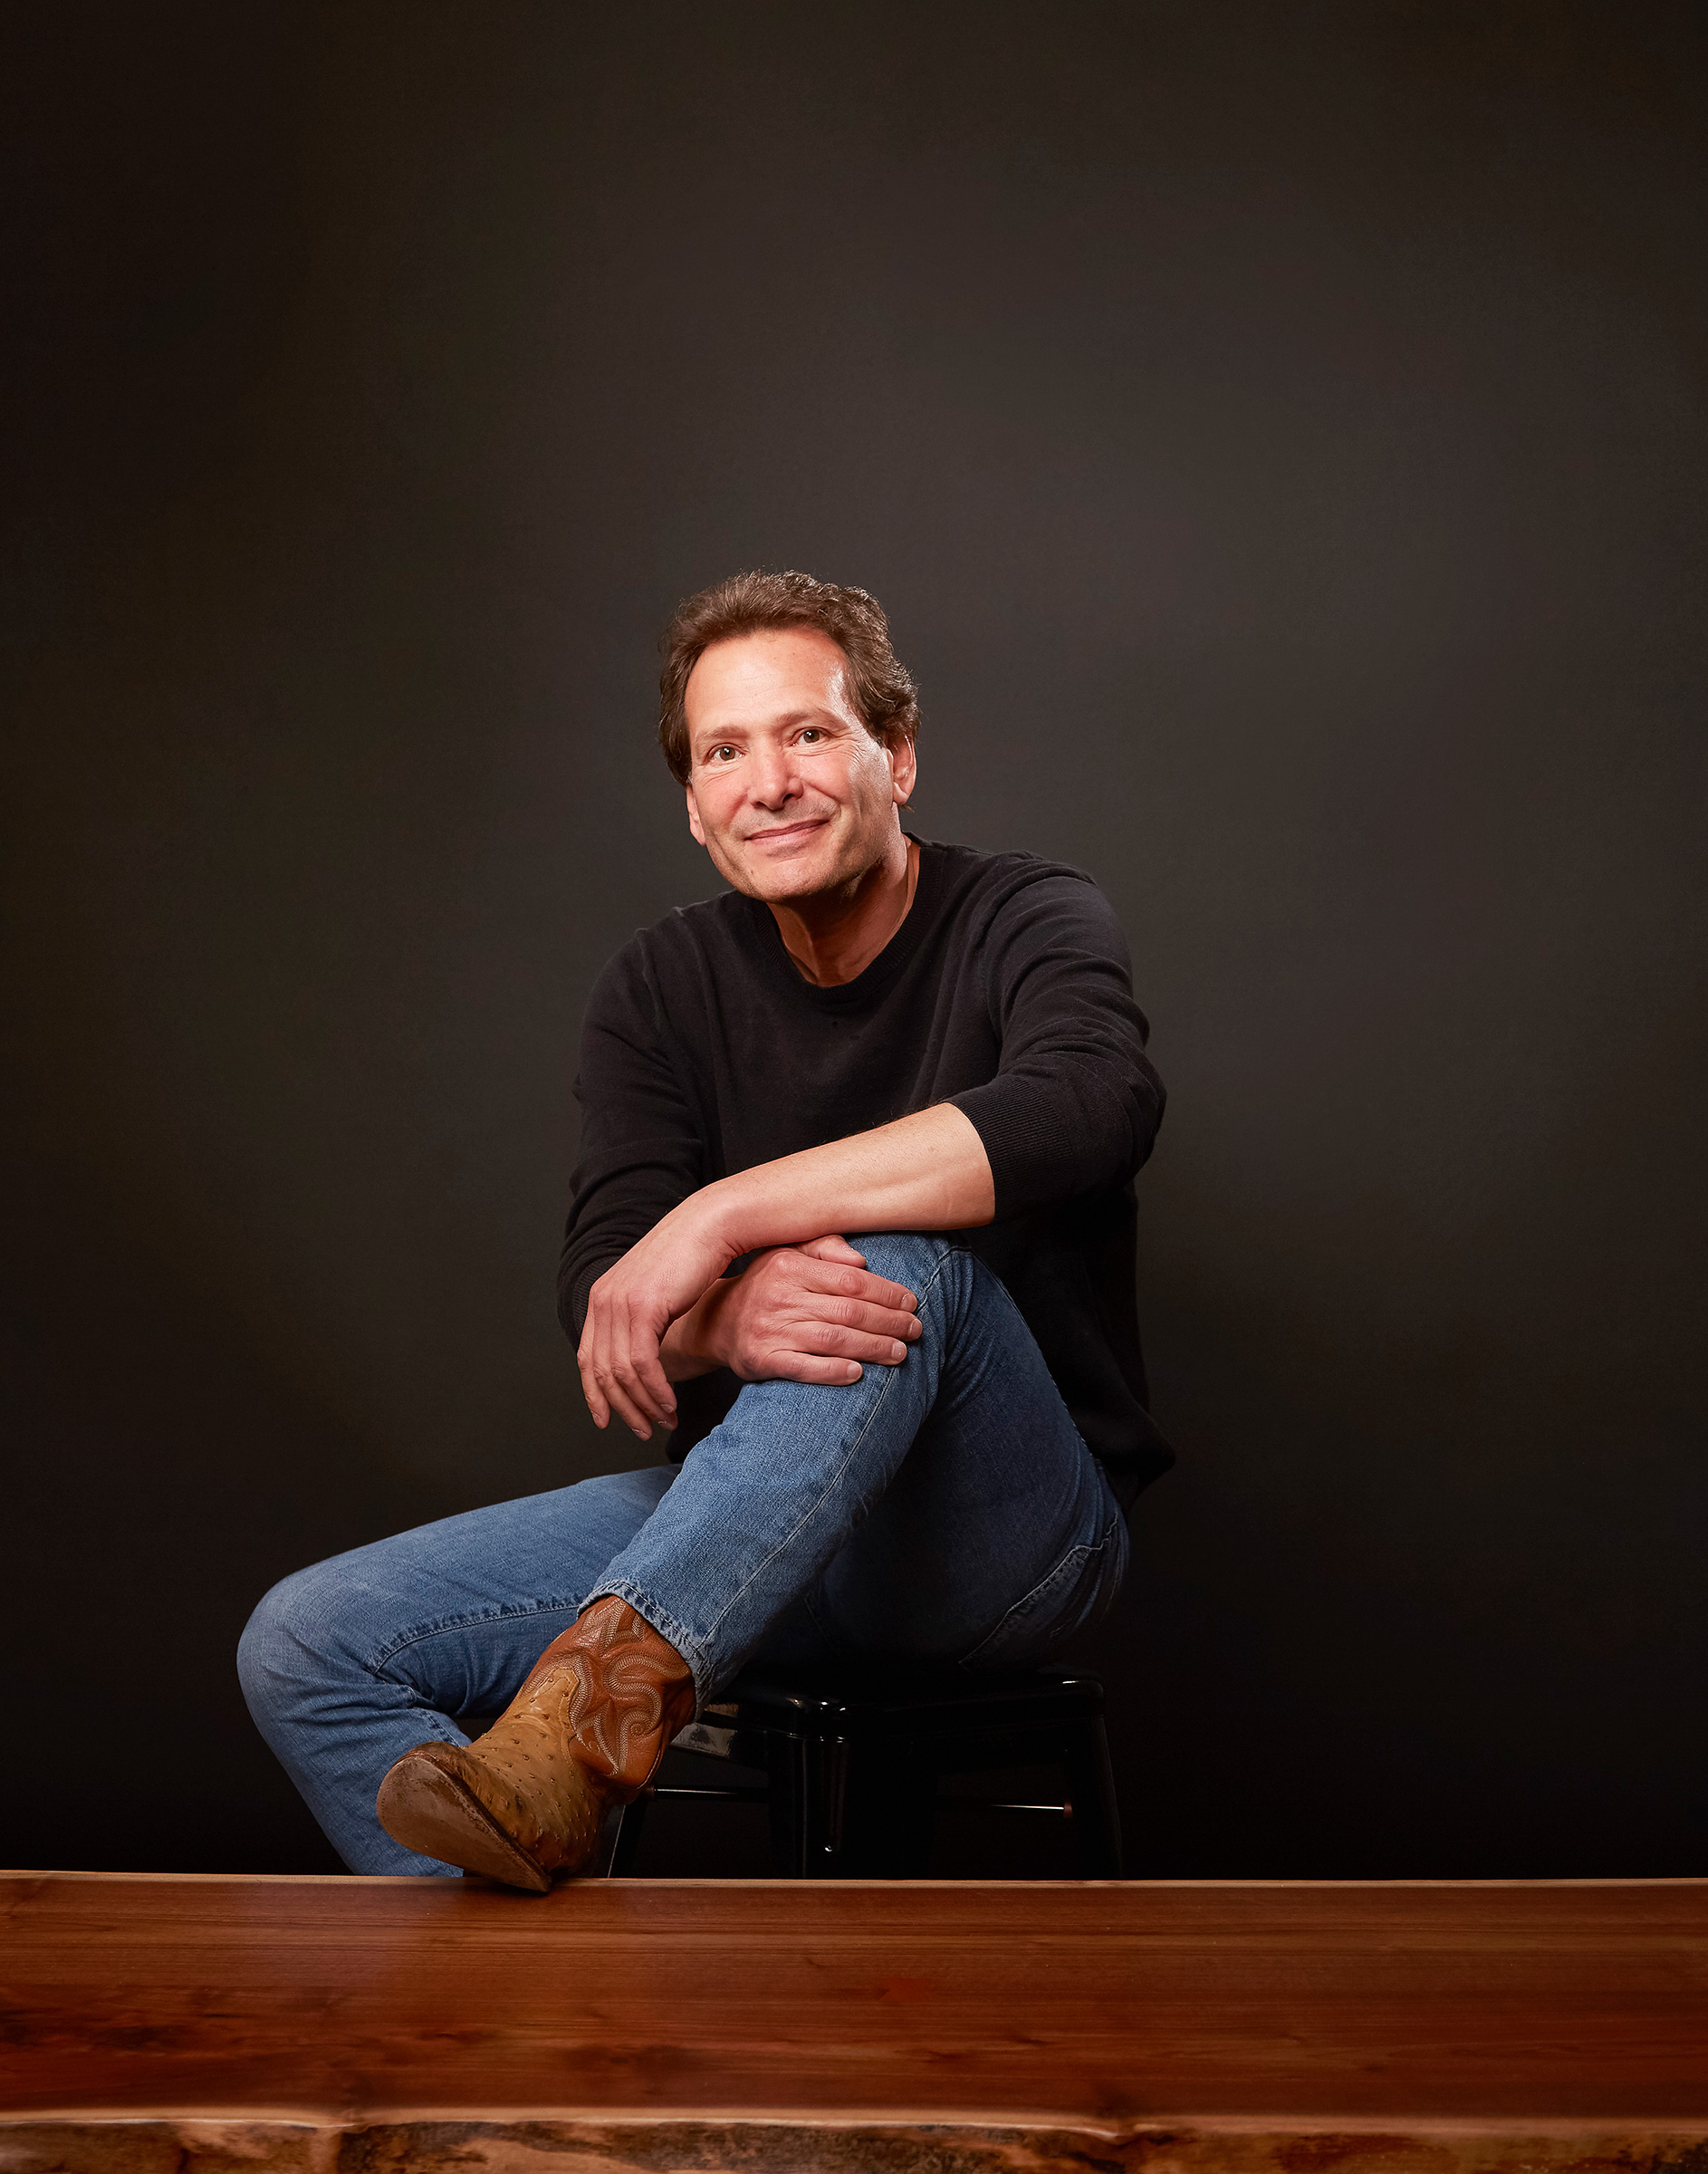 Dan Schulman, president and CEO of PayPal, at the company's offices in San Jose, Calif., in 2016. (Robyn Twomey—Redux)